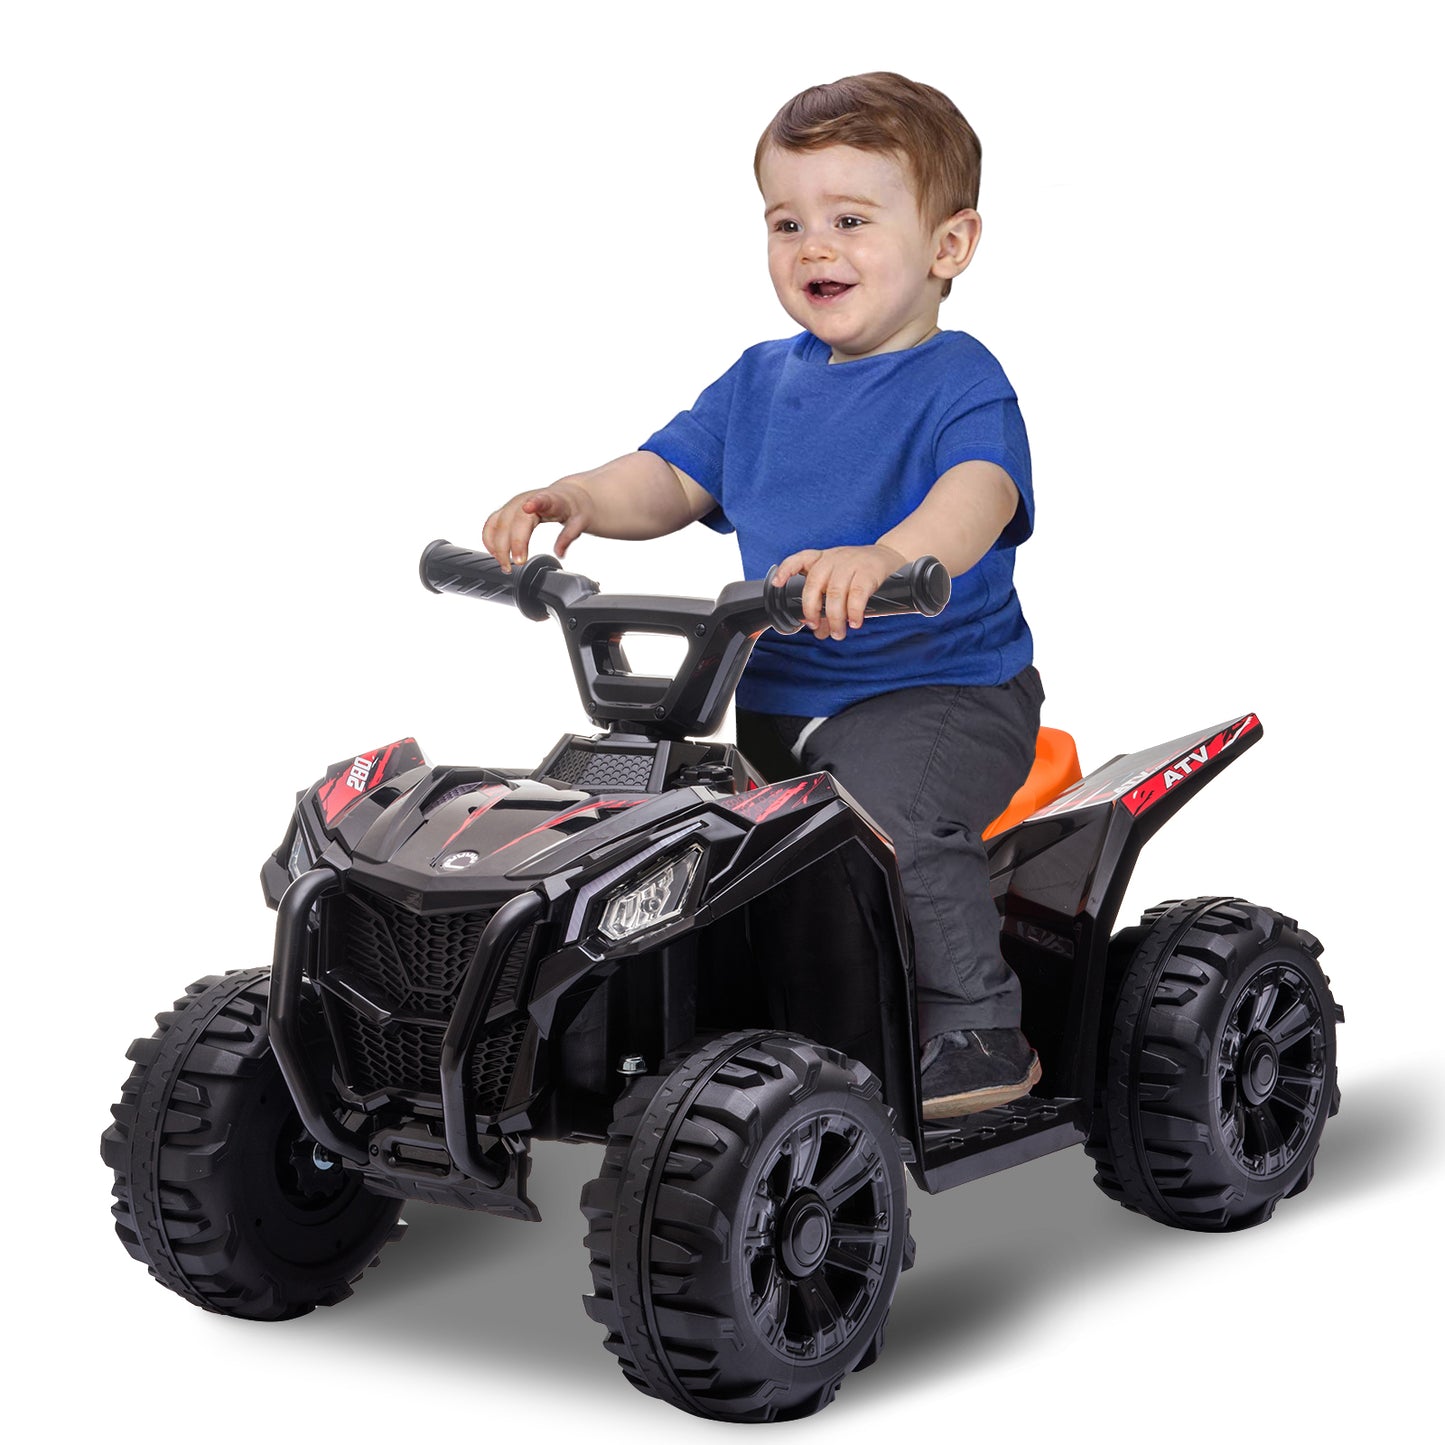 SYNGAR Kids Ride on ATV, 6V Toy Vehicle with Rechargeable Battery, Electric Ride On Toy, Battery Powered Car for Kids Girls Boys, Black